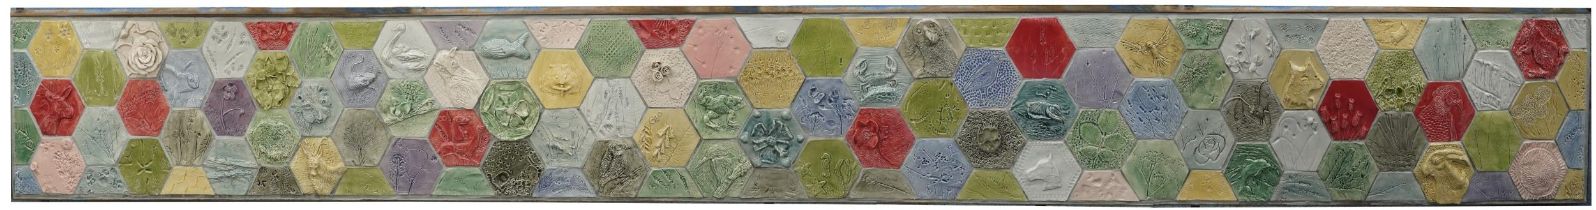 Unusually large mid century style ceramic tile wall panel decorated in relief with flowers and